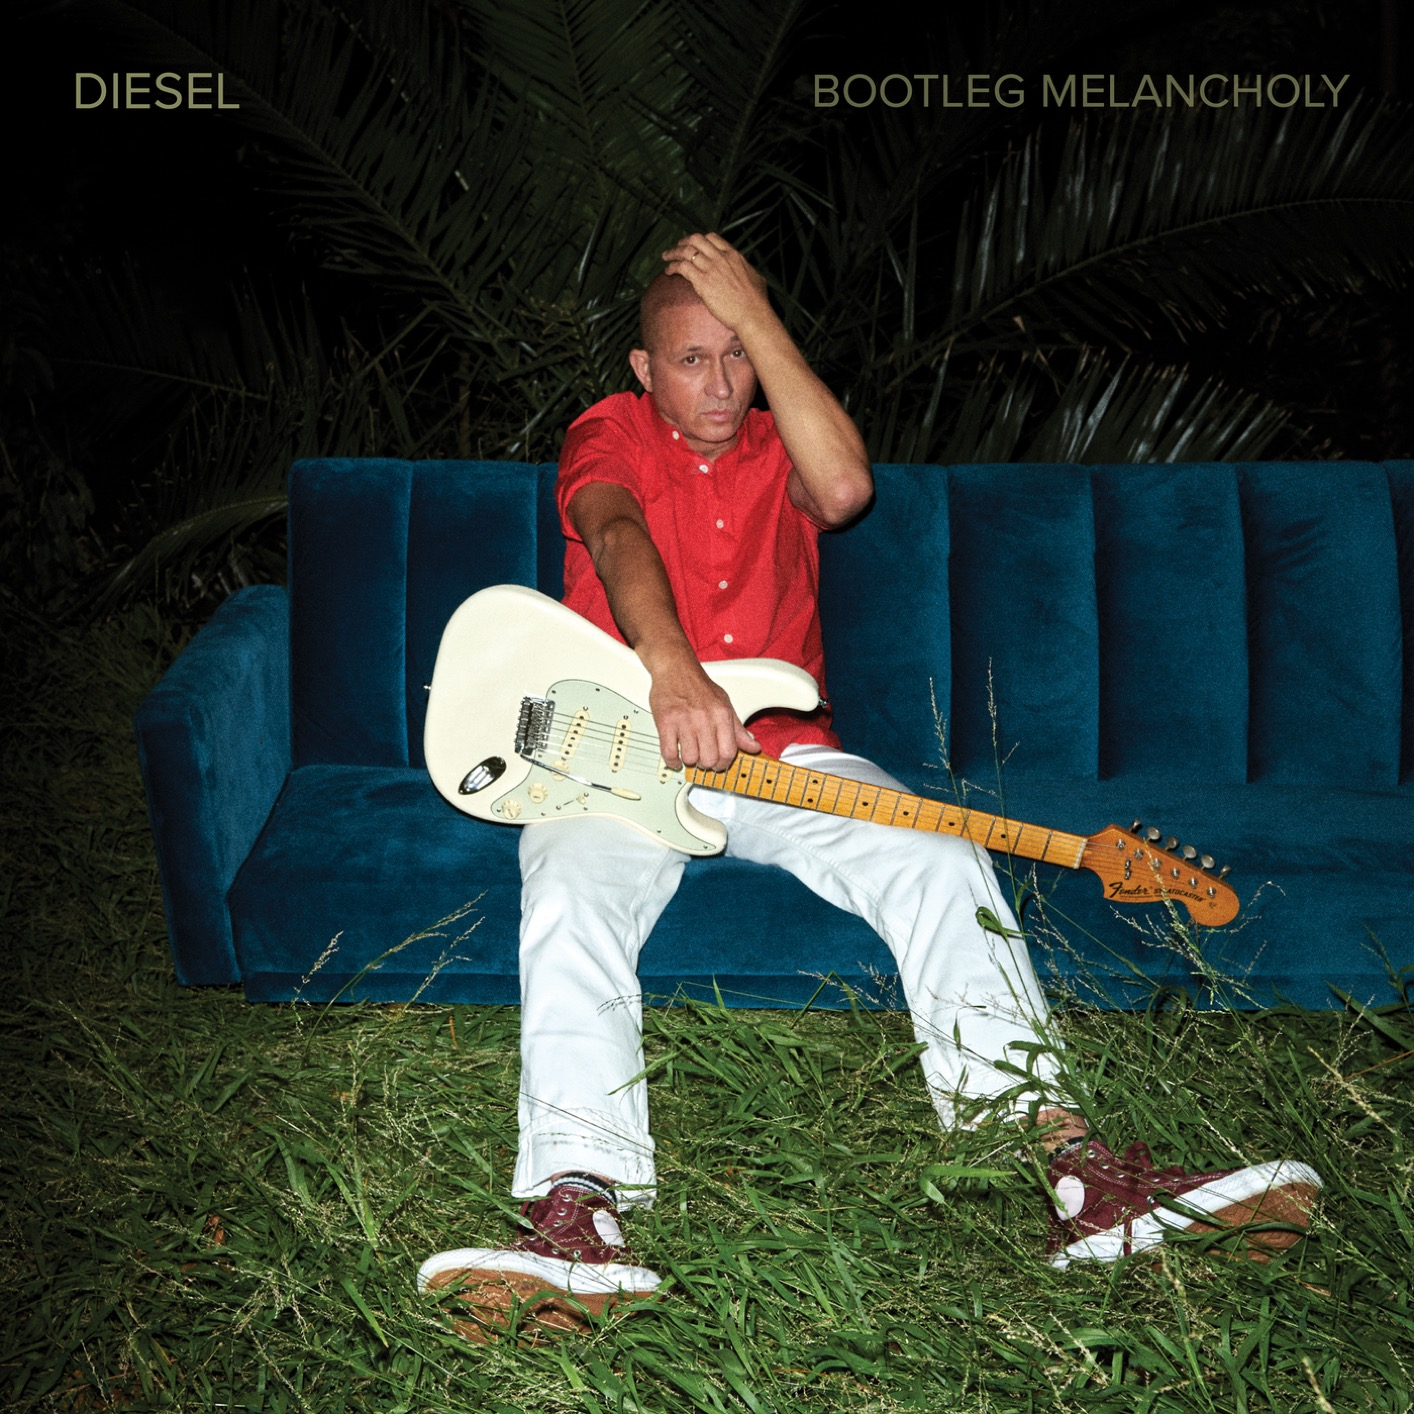 Diesel Unveils the Inspiration Behind His New Album 'Bootleg Melancholy'